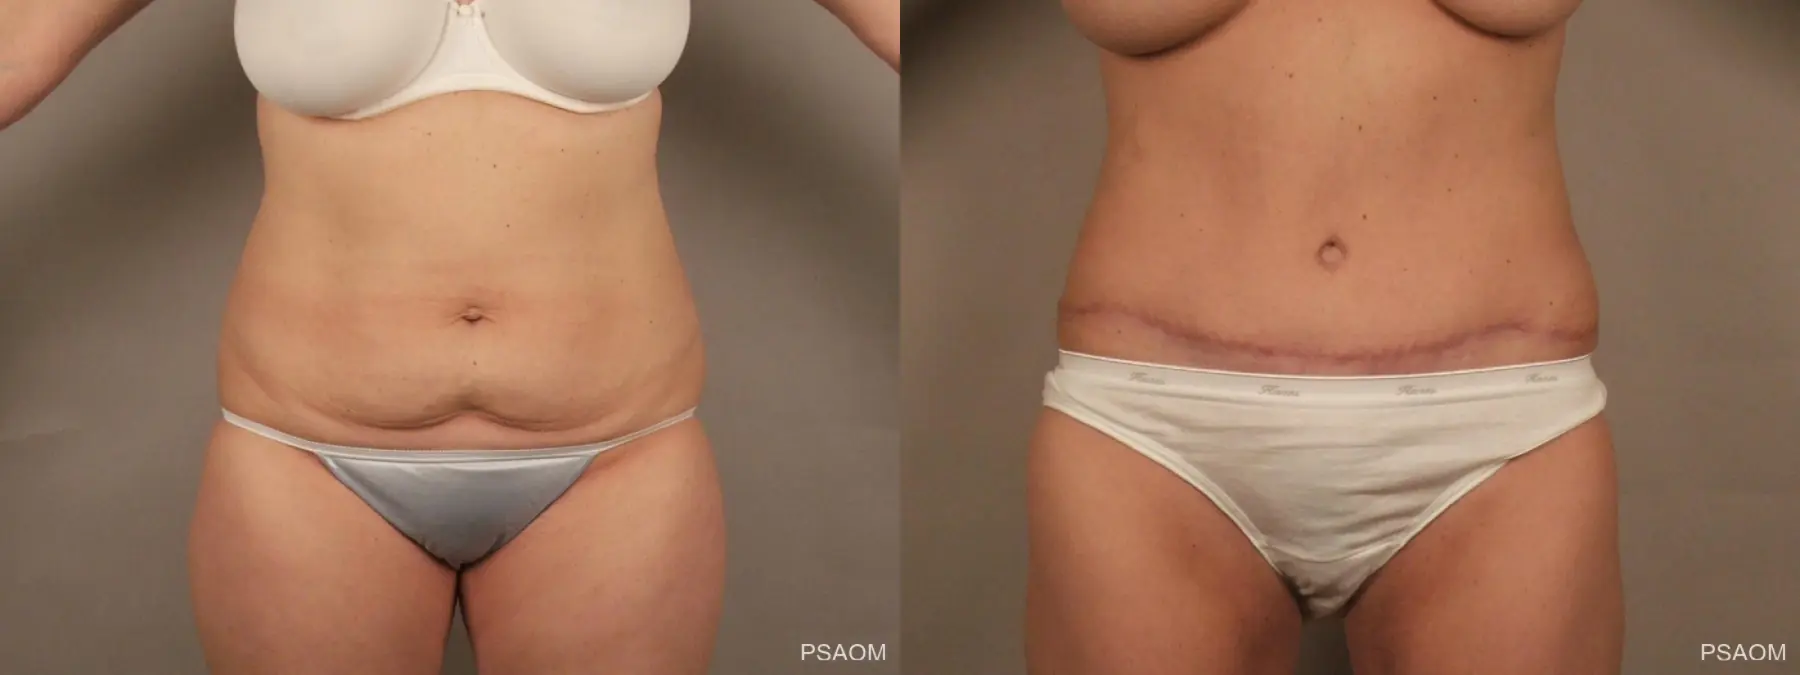 Tummy Tuck: Patient 1 - Before and After 1